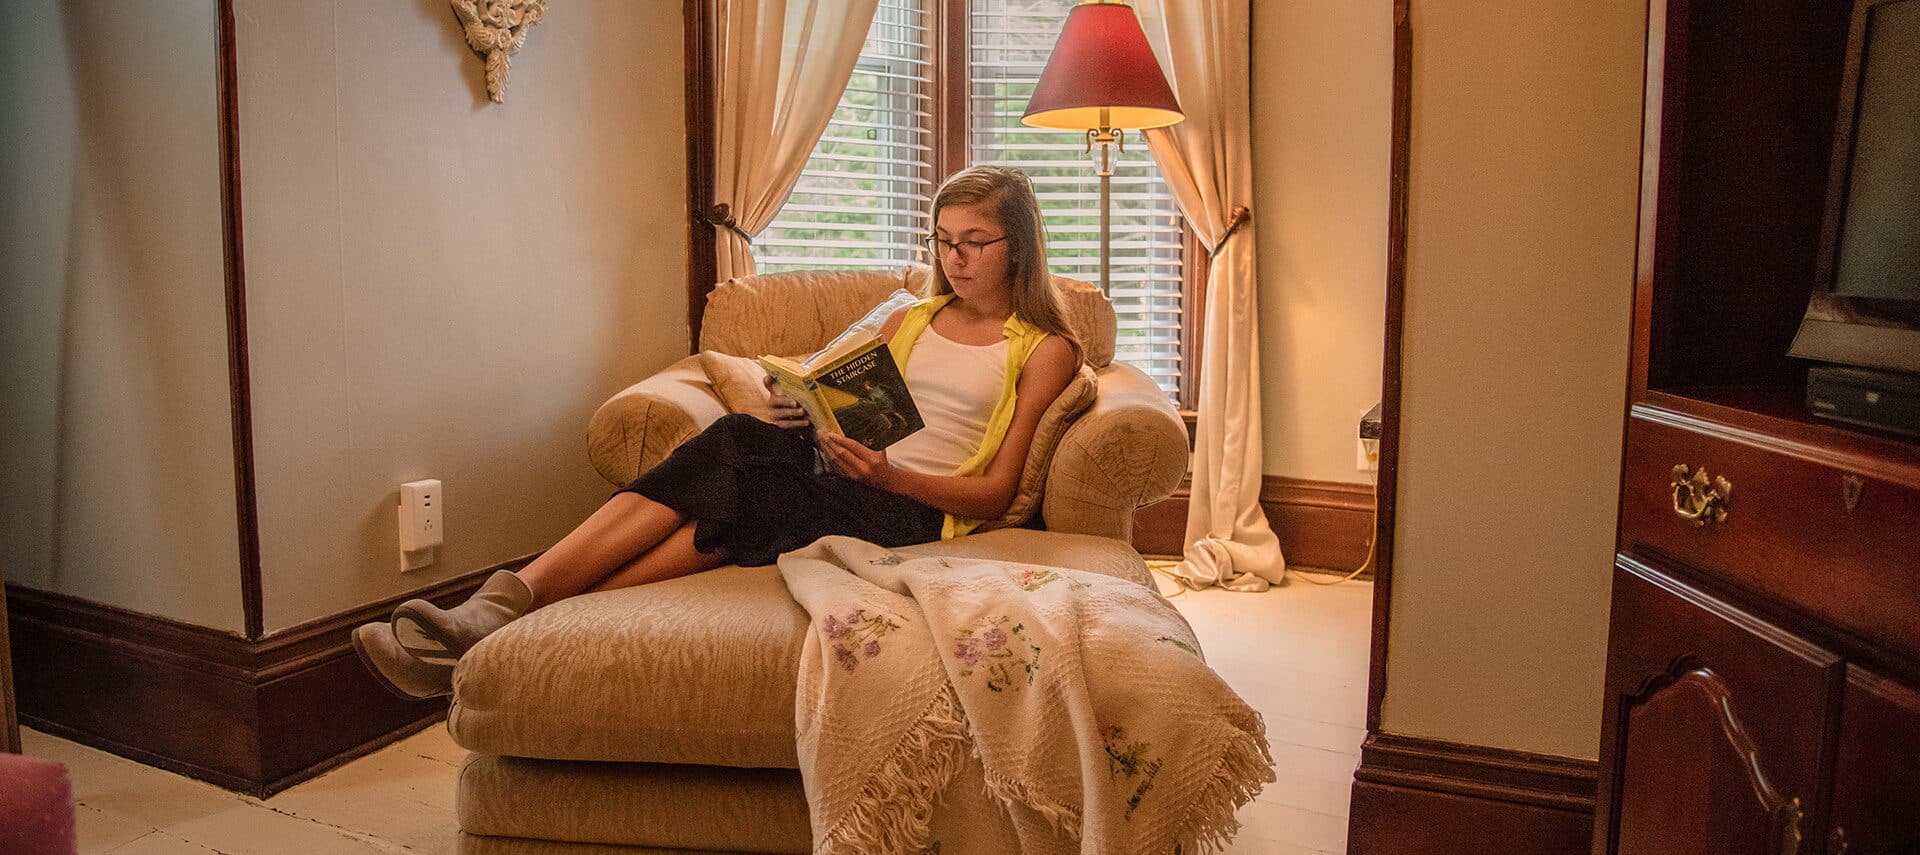 young lady reading a book while sitting on a chaise